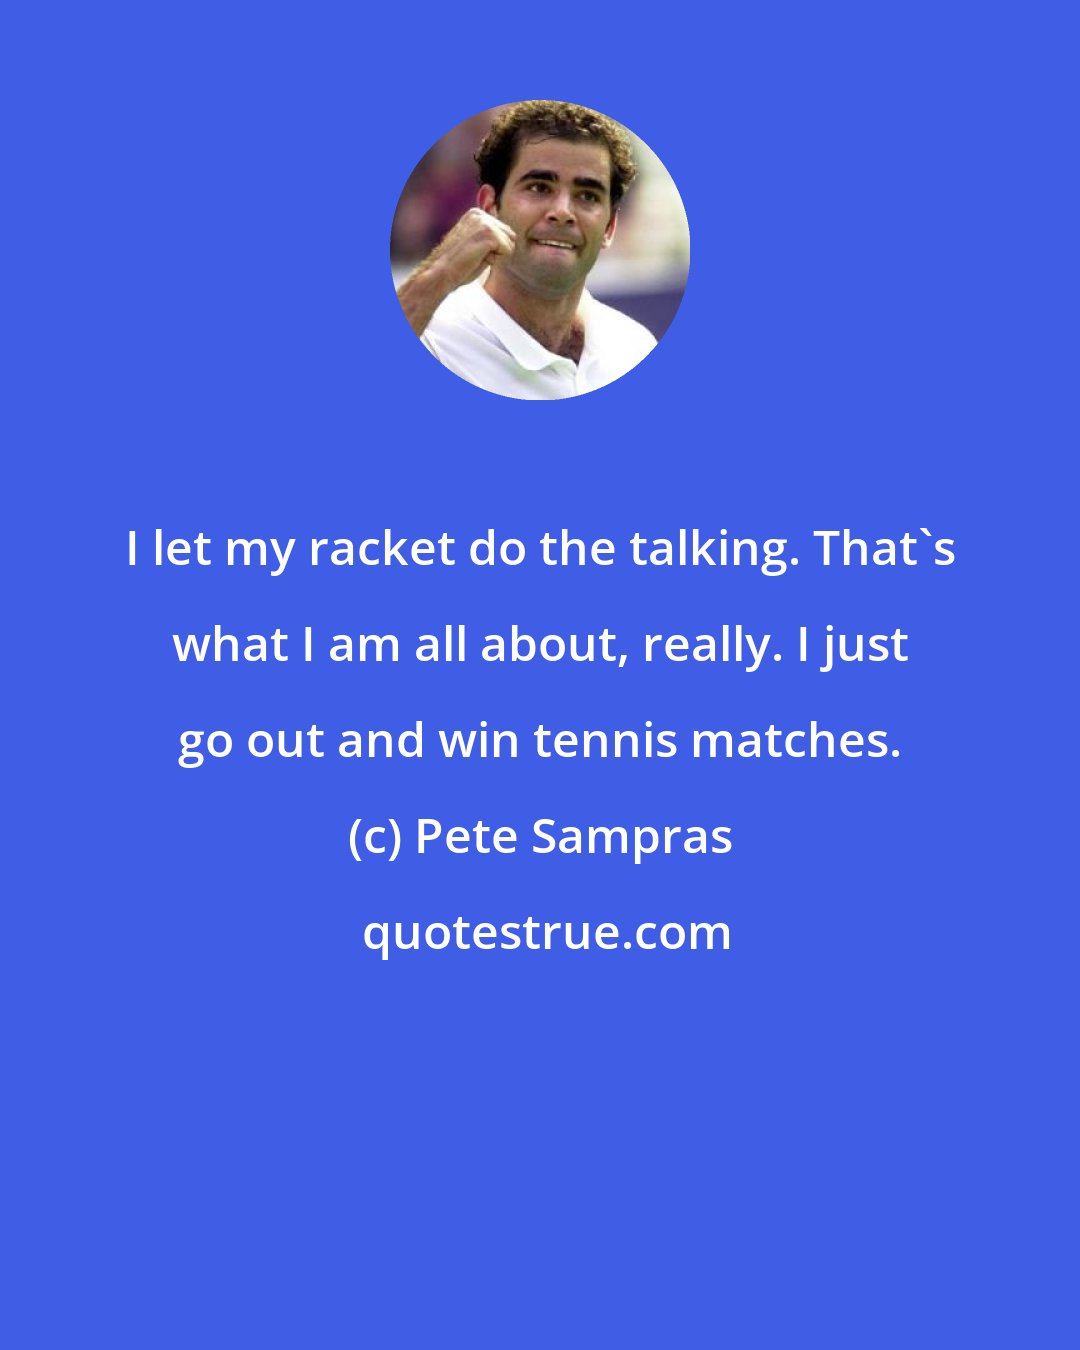 Pete Sampras: I let my racket do the talking. That's what I am all about, really. I just go out and win tennis matches.